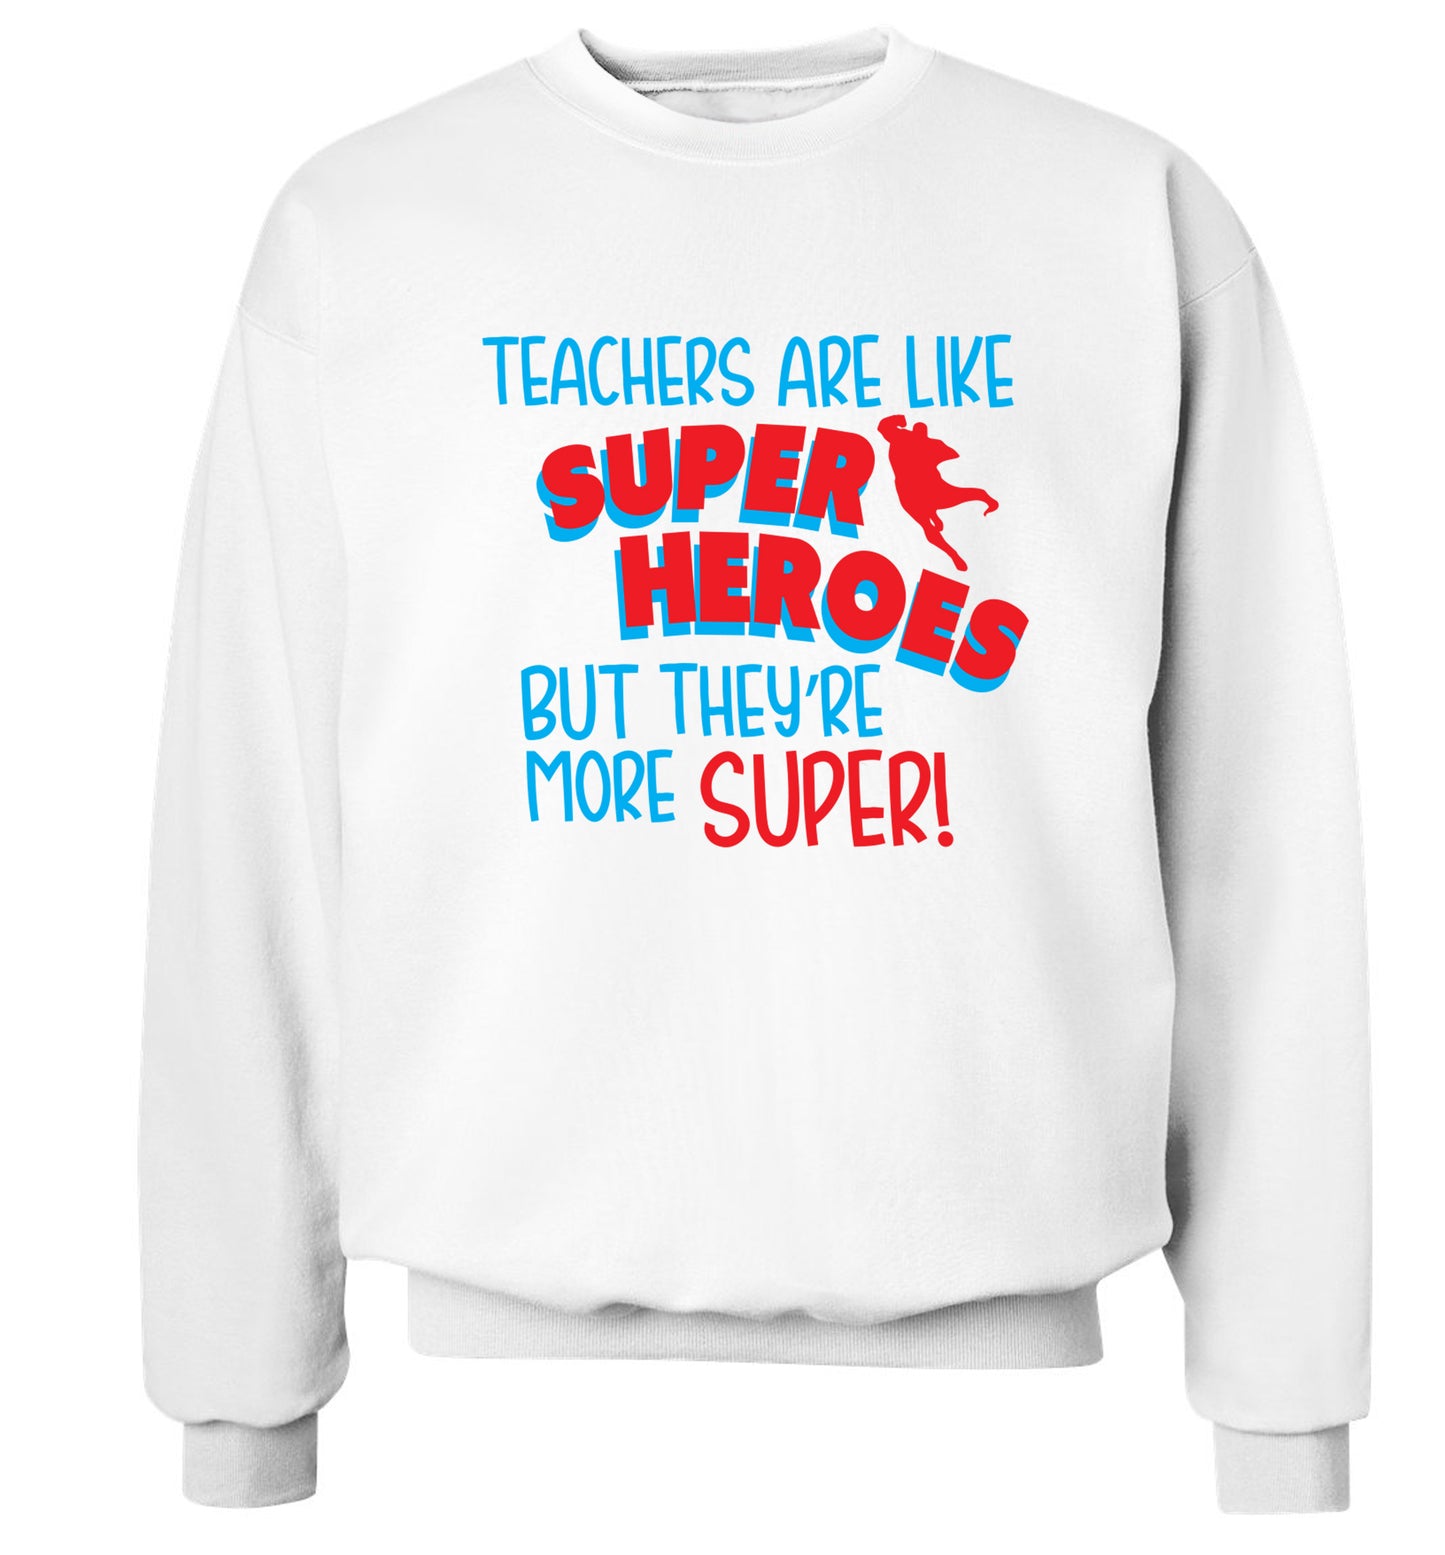 Teachers are like superheros but they're more super Adult's unisex white Sweater 2XL